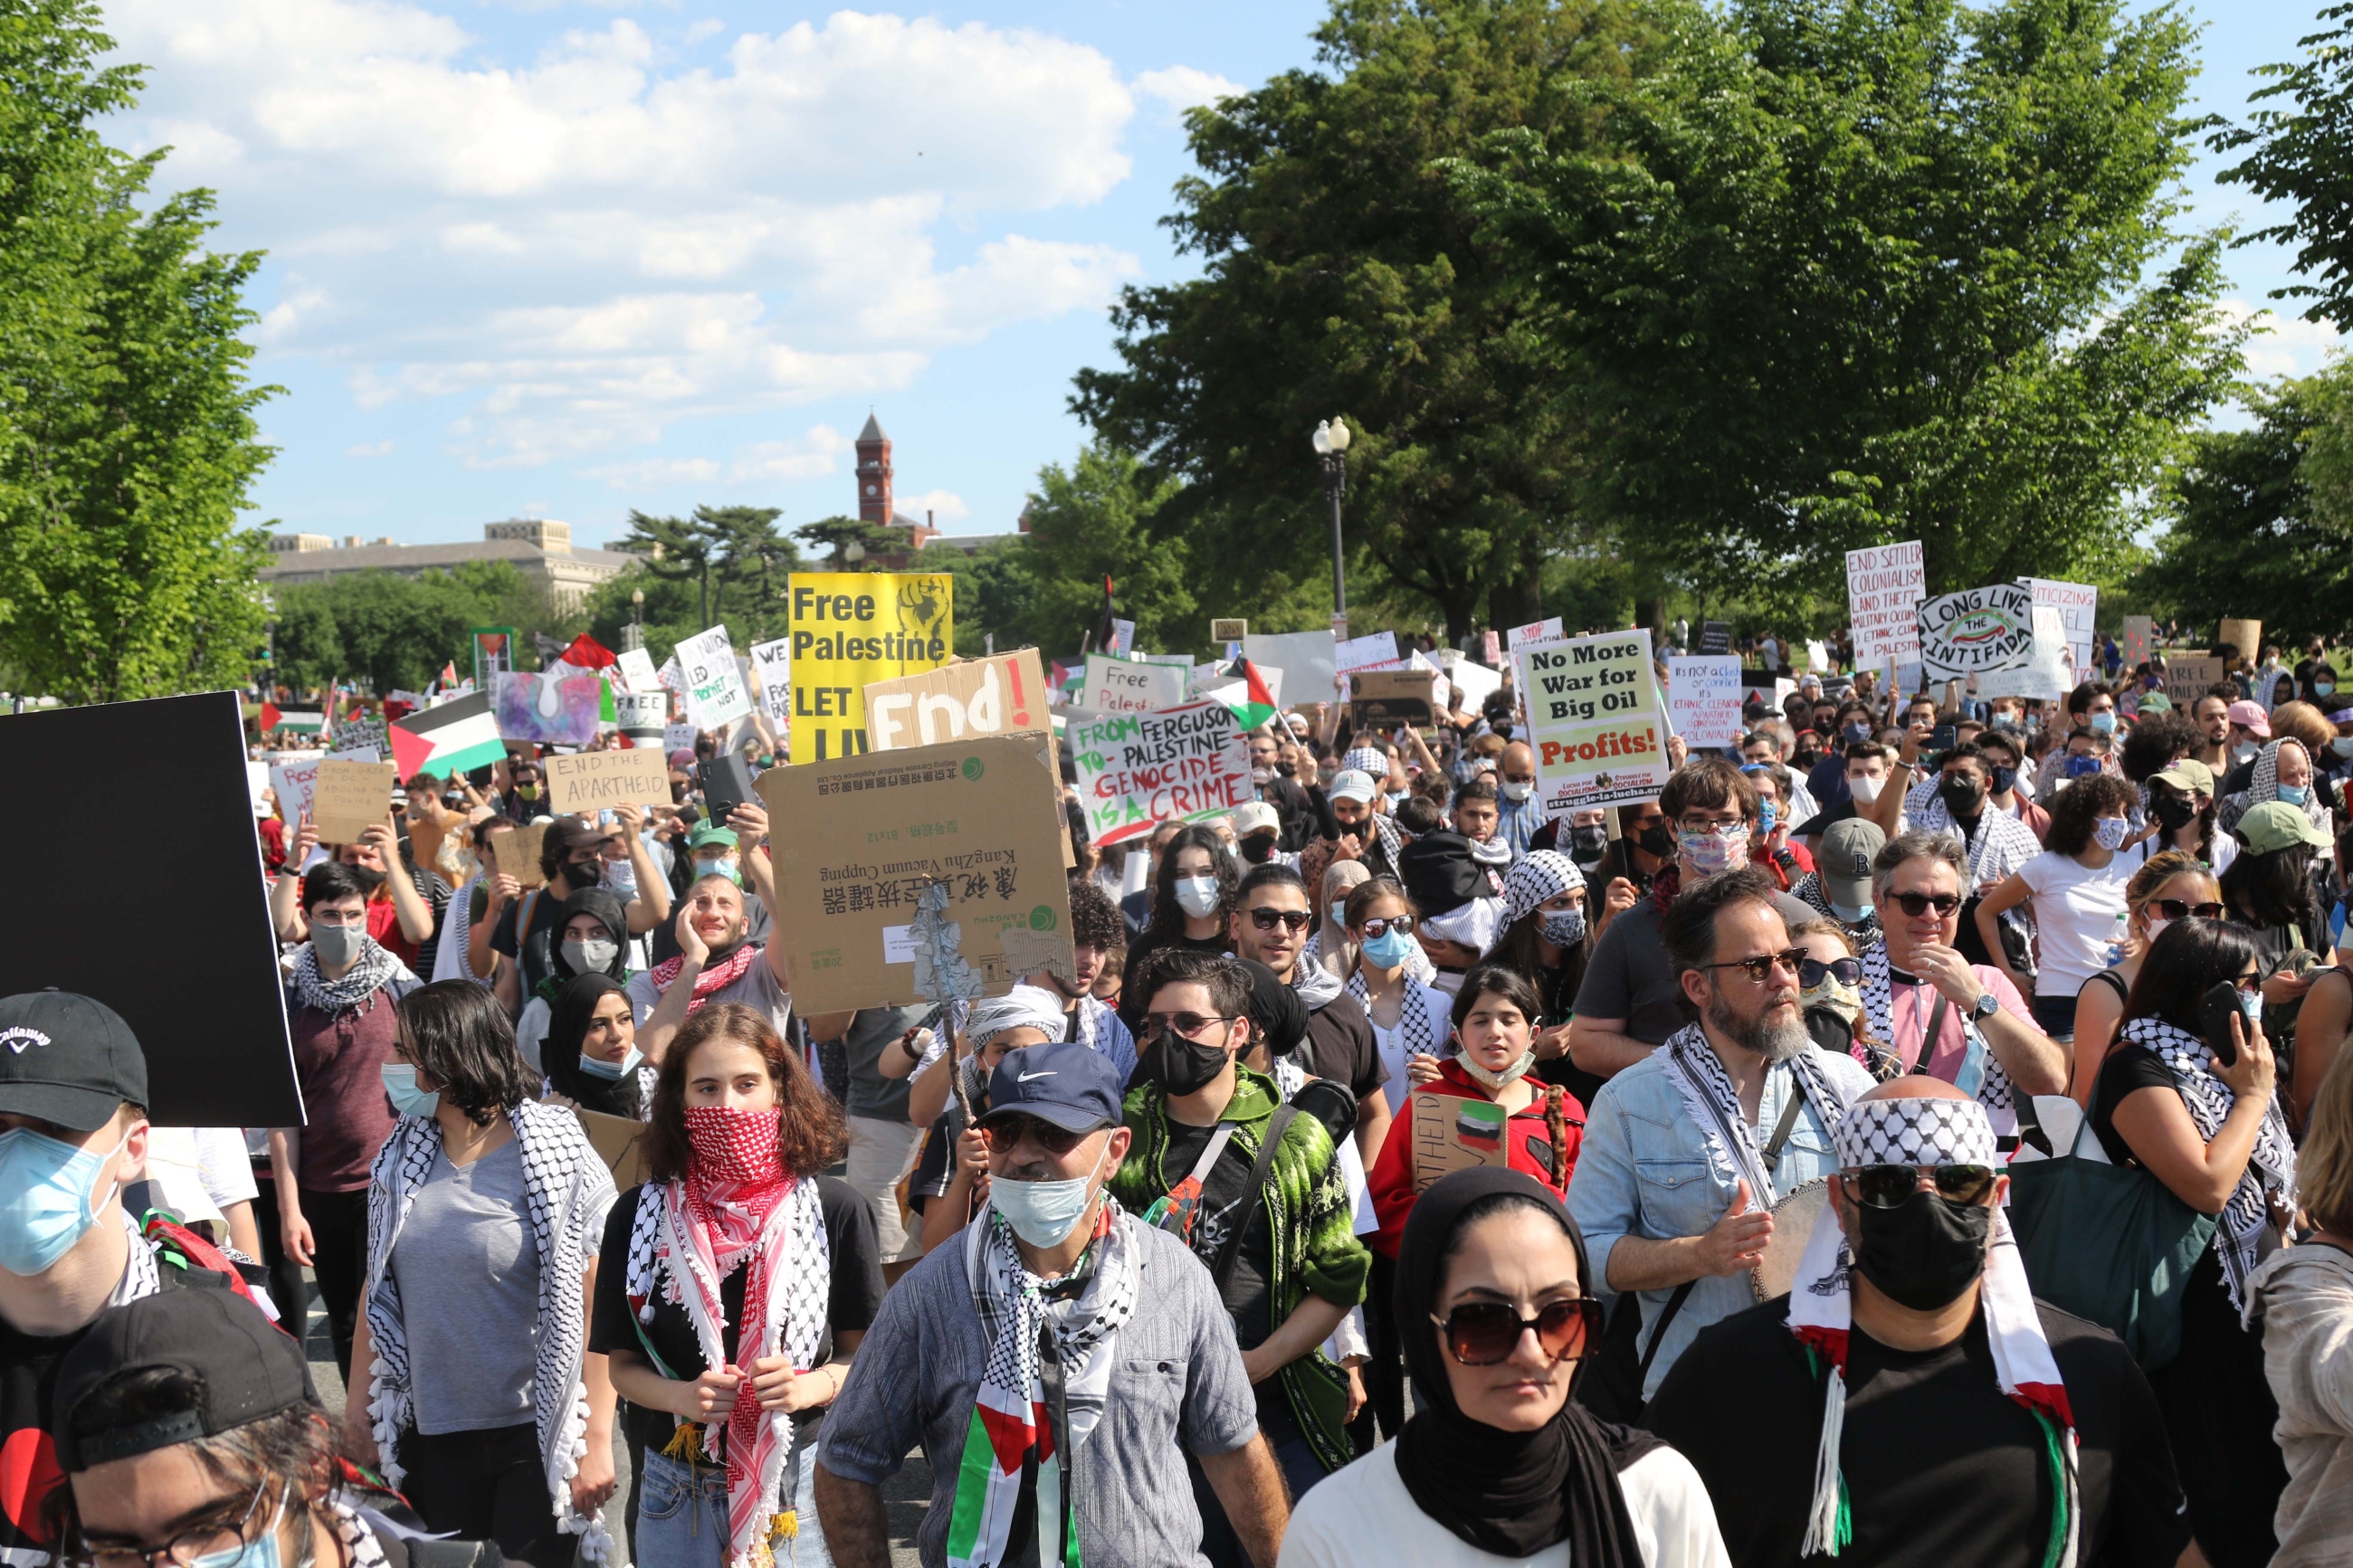 More than a thousand protesters arrived in Washington on Saturday to demonstrate in solidarity with Palestinians in the West Bank and Gaza.